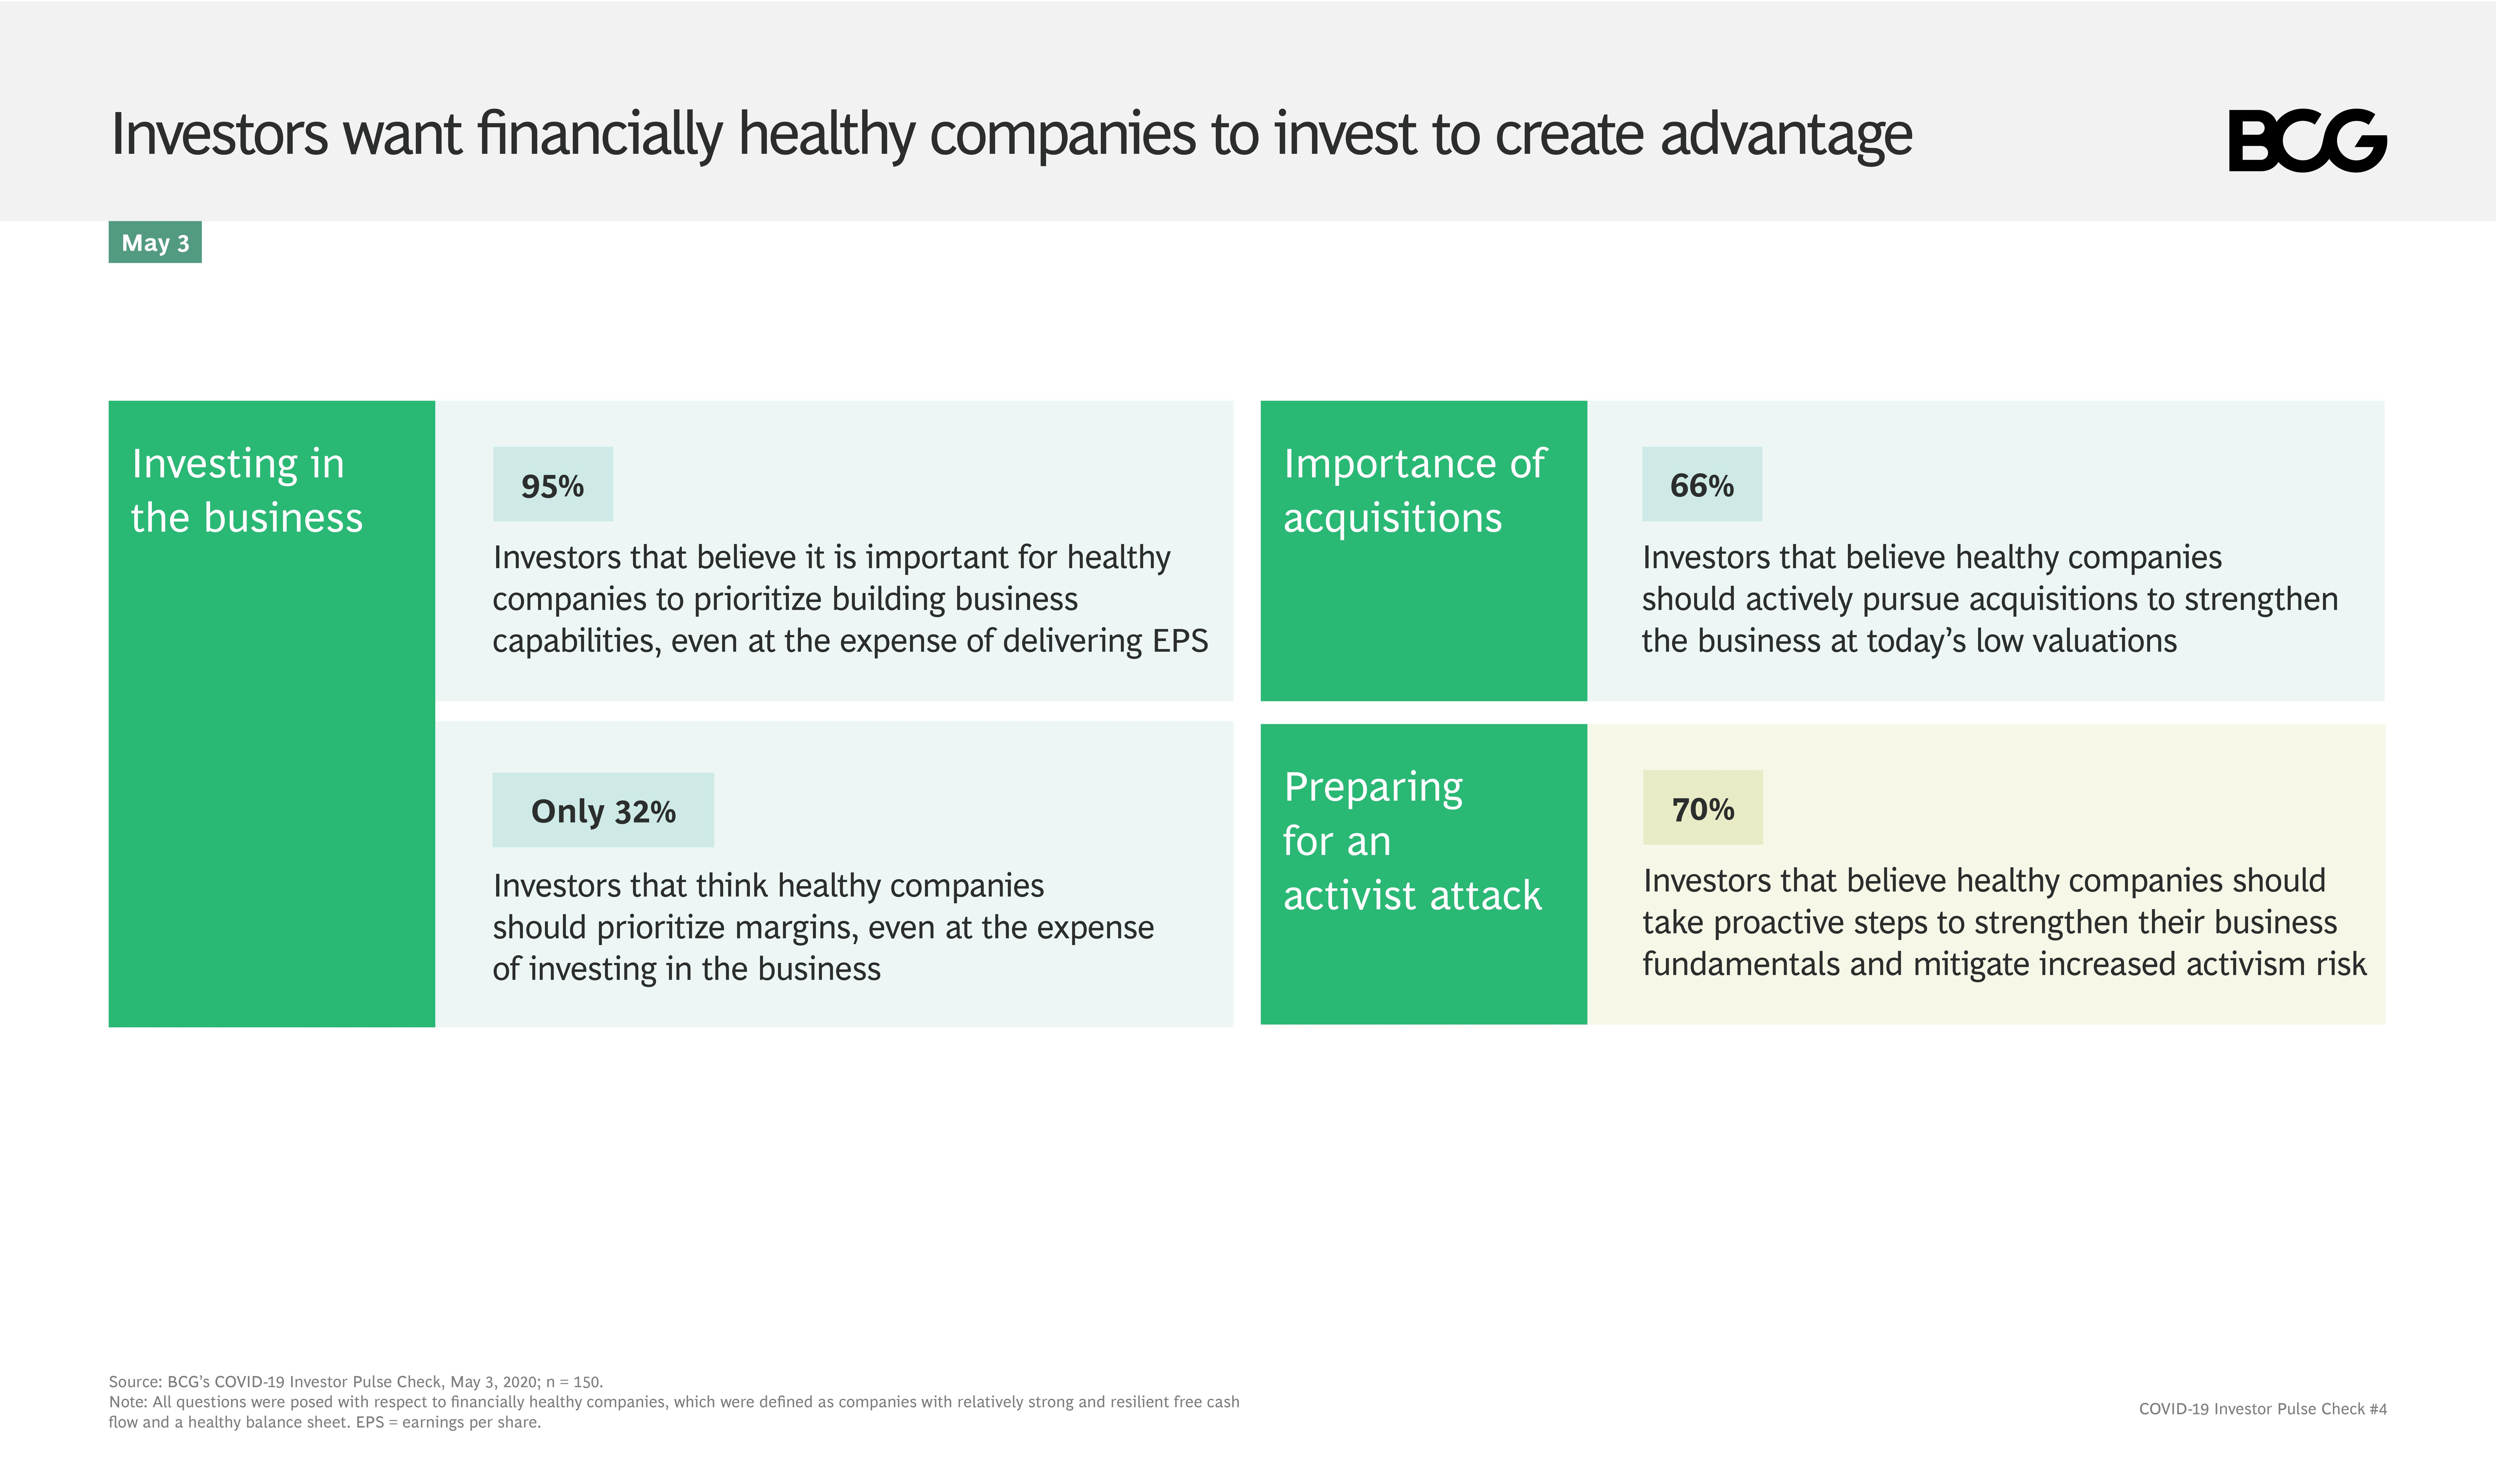 Investors want financially healthy companies to invest to create advantage.